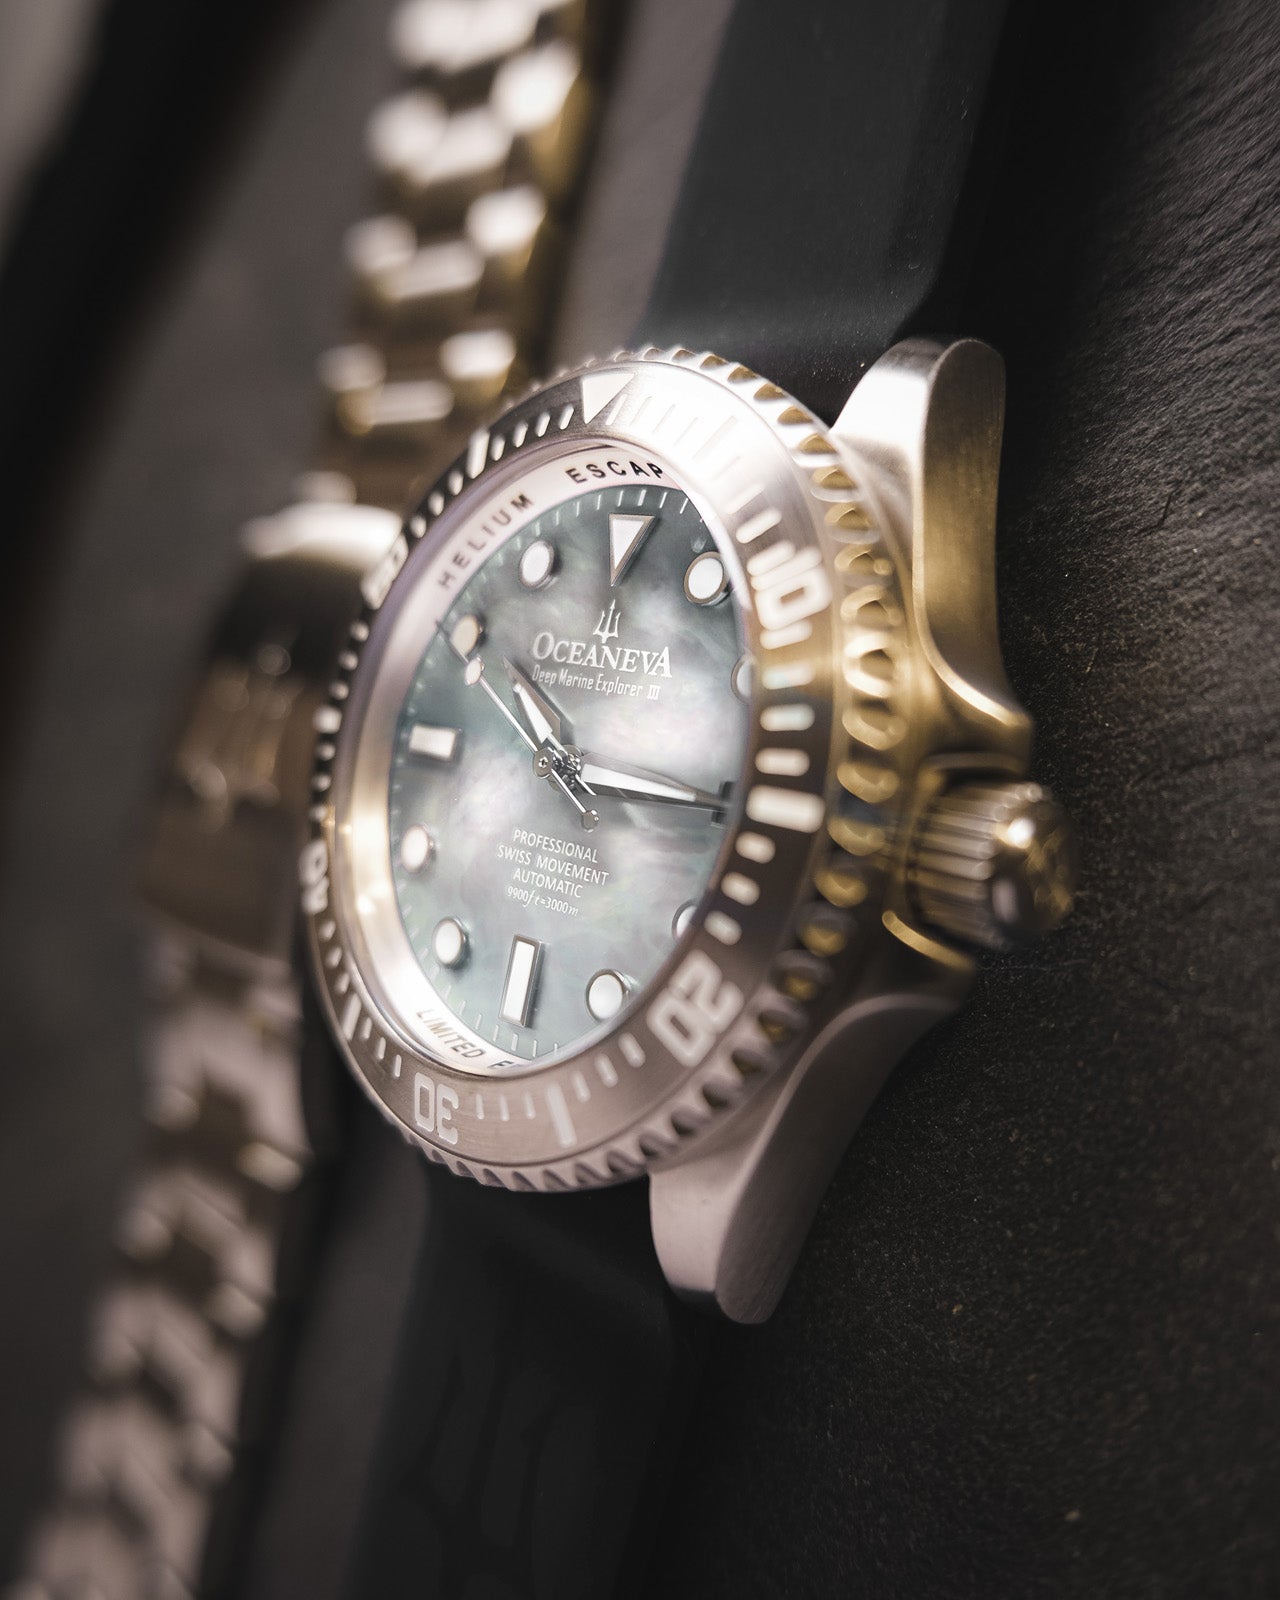 Oceaneva 3000M Dive Watch White Mother of Pearl Stainless Side View With Rubber Strap